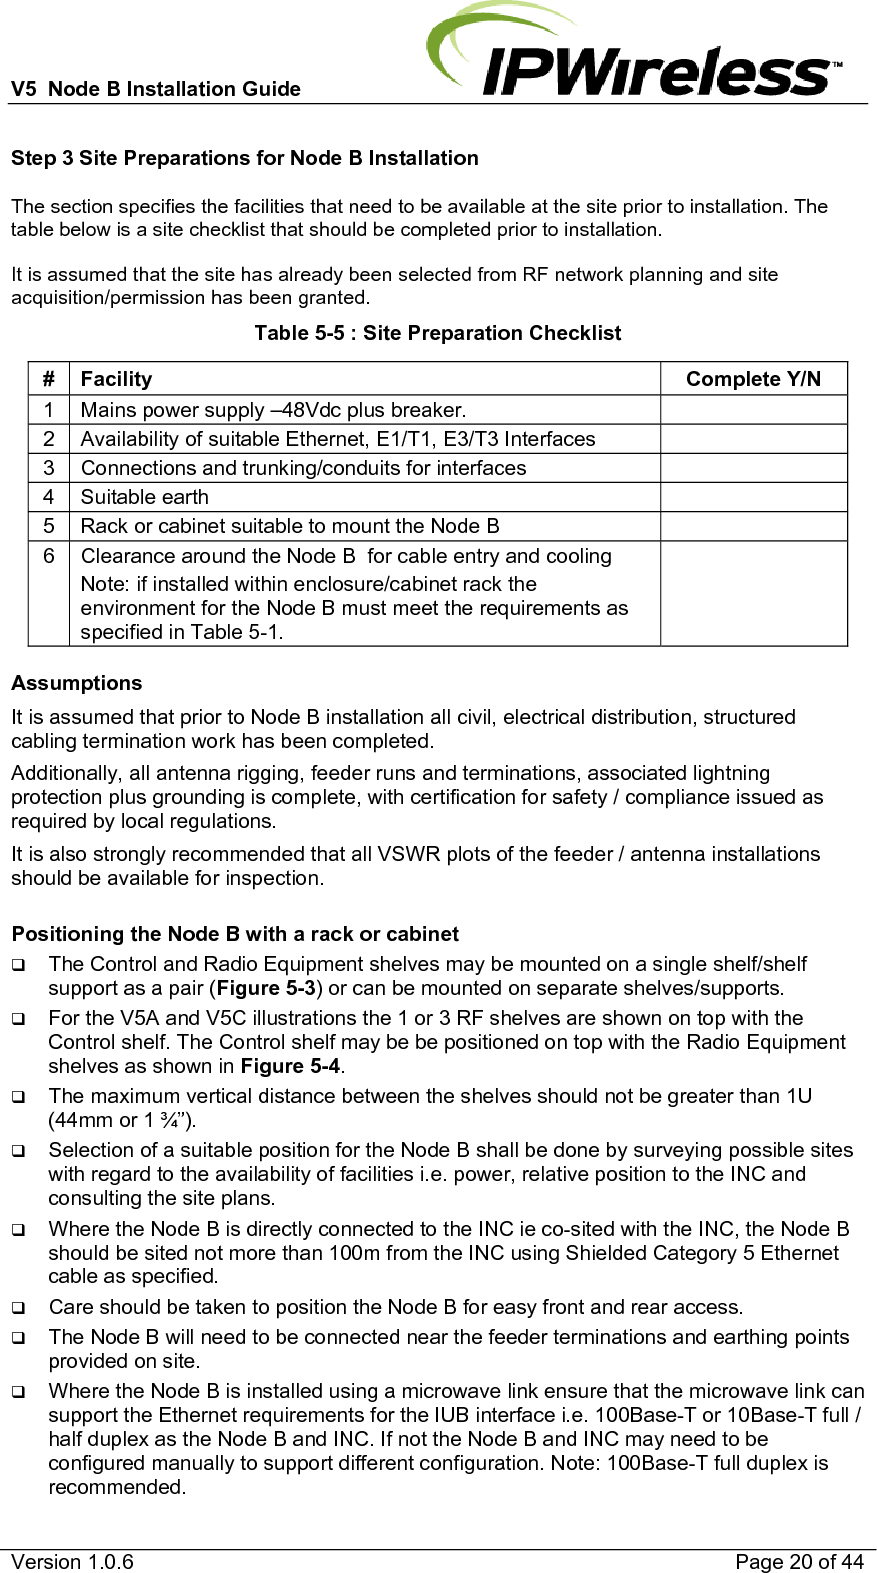 V5  Node B Installation Guide                           Version 1.0.6    Page 20 of 44 Step 3 Site Preparations for Node B Installation The section specifies the facilities that need to be available at the site prior to installation. The table below is a site checklist that should be completed prior to installation.  It is assumed that the site has already been selected from RF network planning and site acquisition/permission has been granted. Table 5-5 : Site Preparation Checklist # Facility  Complete Y/N 1  Mains power supply –48Vdc plus breaker.   2  Availability of suitable Ethernet, E1/T1, E3/T3 Interfaces   3  Connections and trunking/conduits for interfaces   4 Suitable earth   5  Rack or cabinet suitable to mount the Node B   6  Clearance around the Node B  for cable entry and cooling Note: if installed within enclosure/cabinet rack the environment for the Node B must meet the requirements as specified in Table 5-1.   Assumptions It is assumed that prior to Node B installation all civil, electrical distribution, structured cabling termination work has been completed. Additionally, all antenna rigging, feeder runs and terminations, associated lightning protection plus grounding is complete, with certification for safety / compliance issued as required by local regulations.  It is also strongly recommended that all VSWR plots of the feeder / antenna installations should be available for inspection.  Positioning the Node B with a rack or cabinet  The Control and Radio Equipment shelves may be mounted on a single shelf/shelf support as a pair (Figure 5-3) or can be mounted on separate shelves/supports.  For the V5A and V5C illustrations the 1 or 3 RF shelves are shown on top with the Control shelf. The Control shelf may be be positioned on top with the Radio Equipment shelves as shown in Figure 5-4.  The maximum vertical distance between the shelves should not be greater than 1U (44mm or 1 ¾”).  Selection of a suitable position for the Node B shall be done by surveying possible sites with regard to the availability of facilities i.e. power, relative position to the INC and consulting the site plans.  Where the Node B is directly connected to the INC ie co-sited with the INC, the Node B should be sited not more than 100m from the INC using Shielded Category 5 Ethernet cable as specified.  Care should be taken to position the Node B for easy front and rear access.  The Node B will need to be connected near the feeder terminations and earthing points provided on site.  Where the Node B is installed using a microwave link ensure that the microwave link can support the Ethernet requirements for the IUB interface i.e. 100Base-T or 10Base-T full / half duplex as the Node B and INC. If not the Node B and INC may need to be configured manually to support different configuration. Note: 100Base-T full duplex is recommended. 